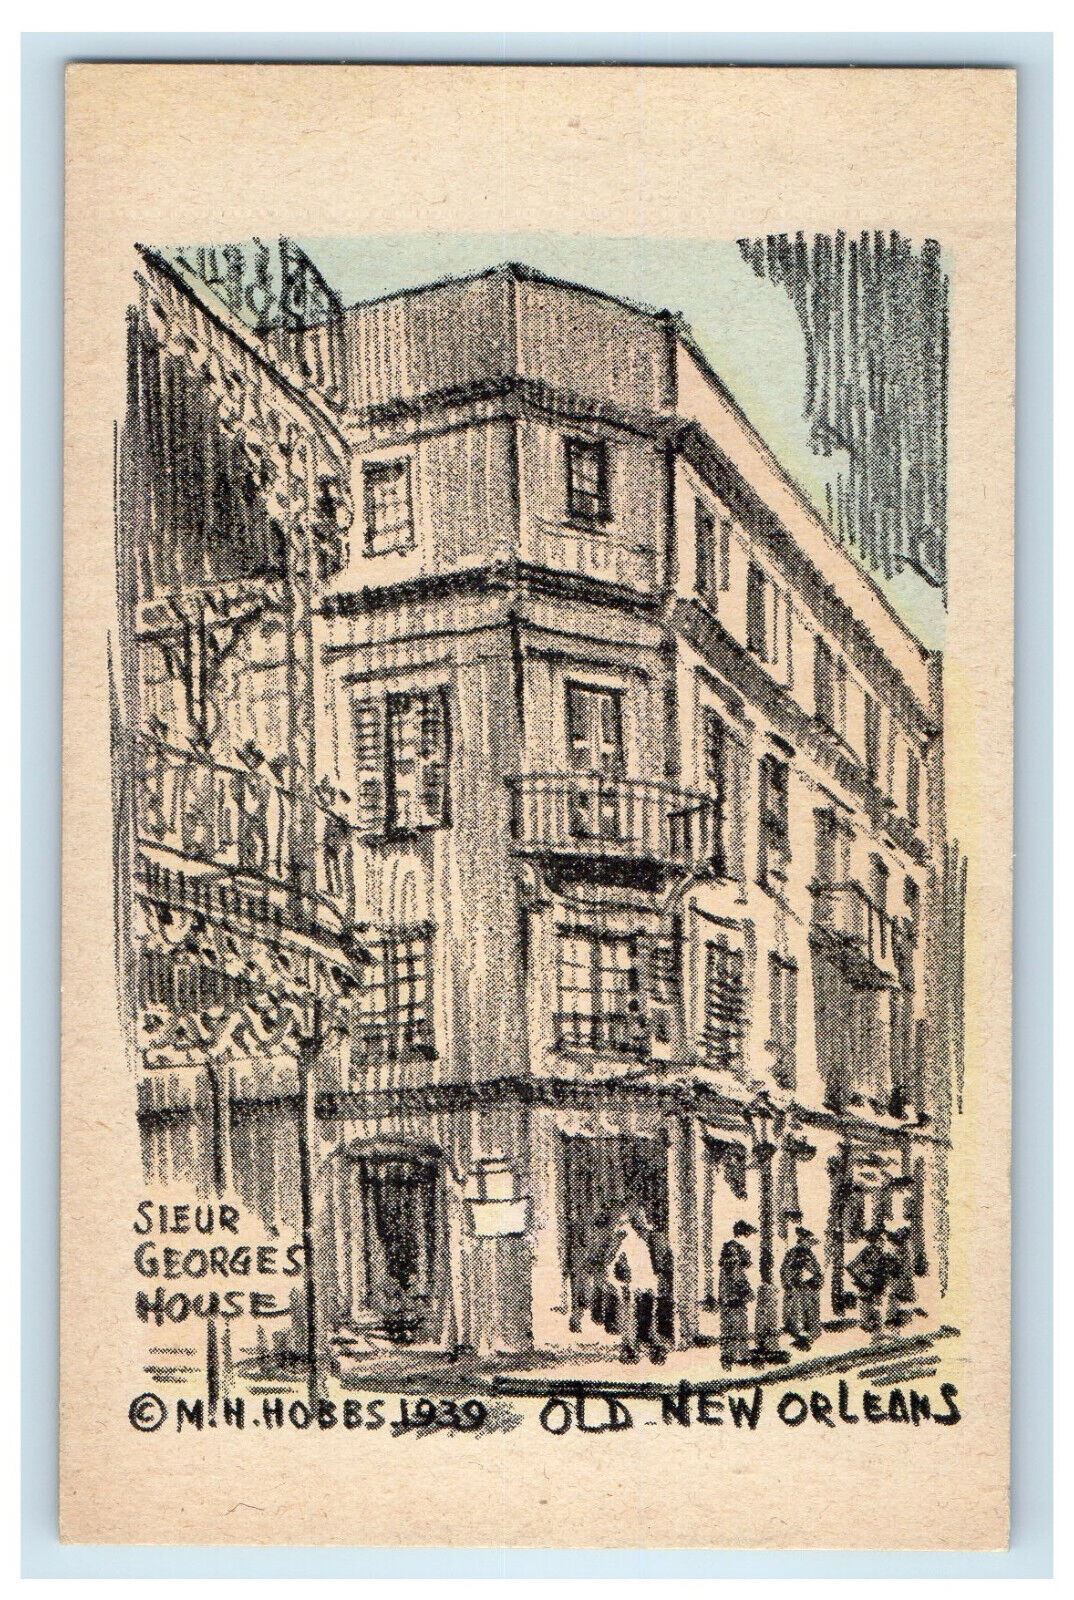 1939 Sieur Georges House Old New Orleans Louisiana LA Unposted Postcard